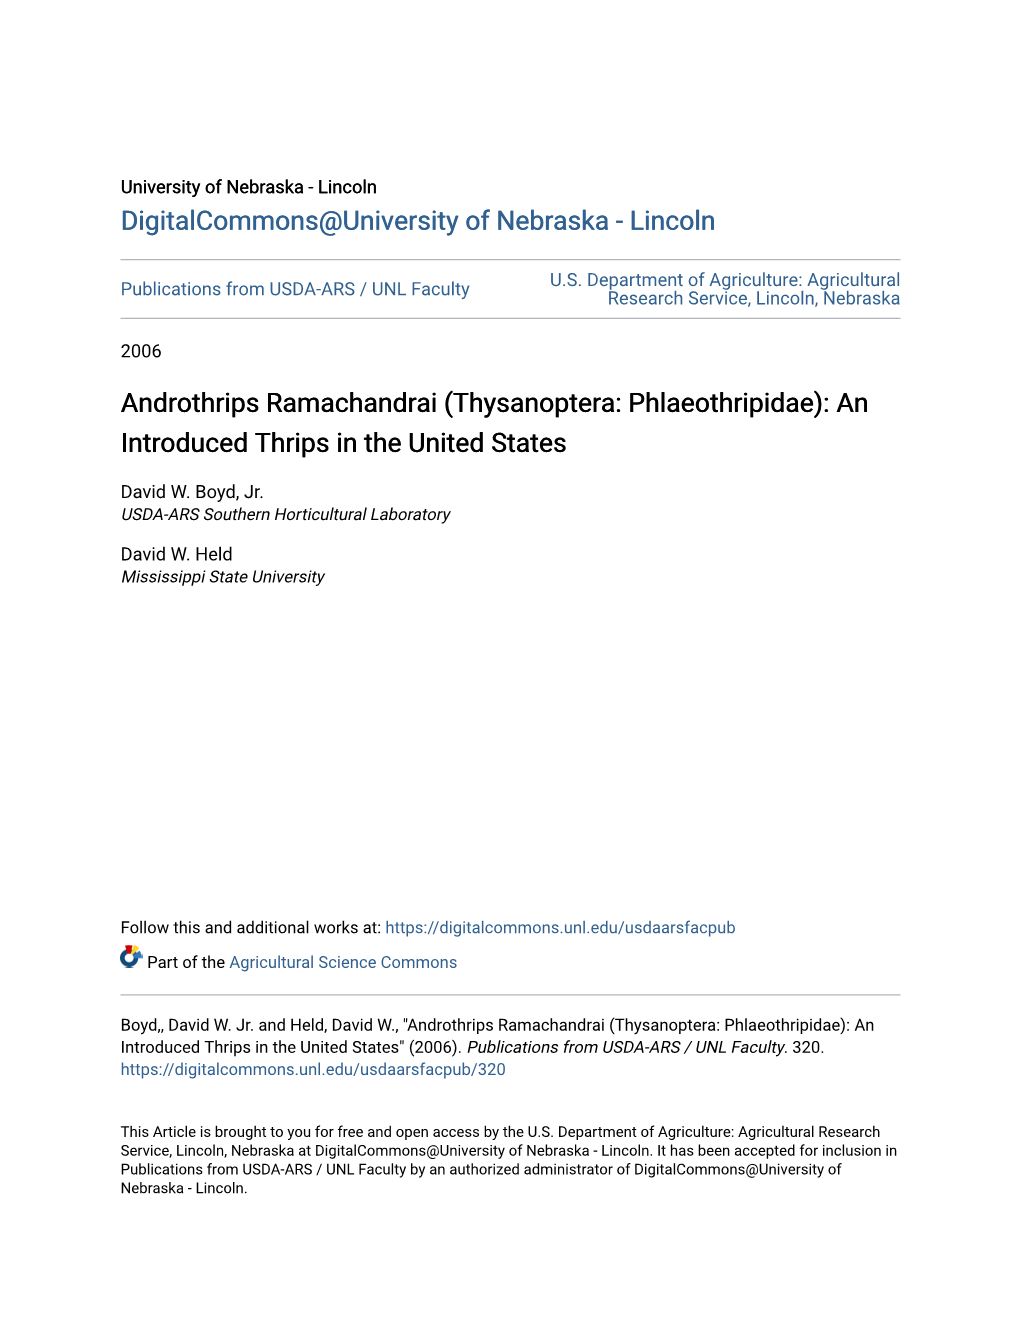 Androthrips Ramachandrai (Thysanoptera: Phlaeothripidae): an Introduced Thrips in the United States